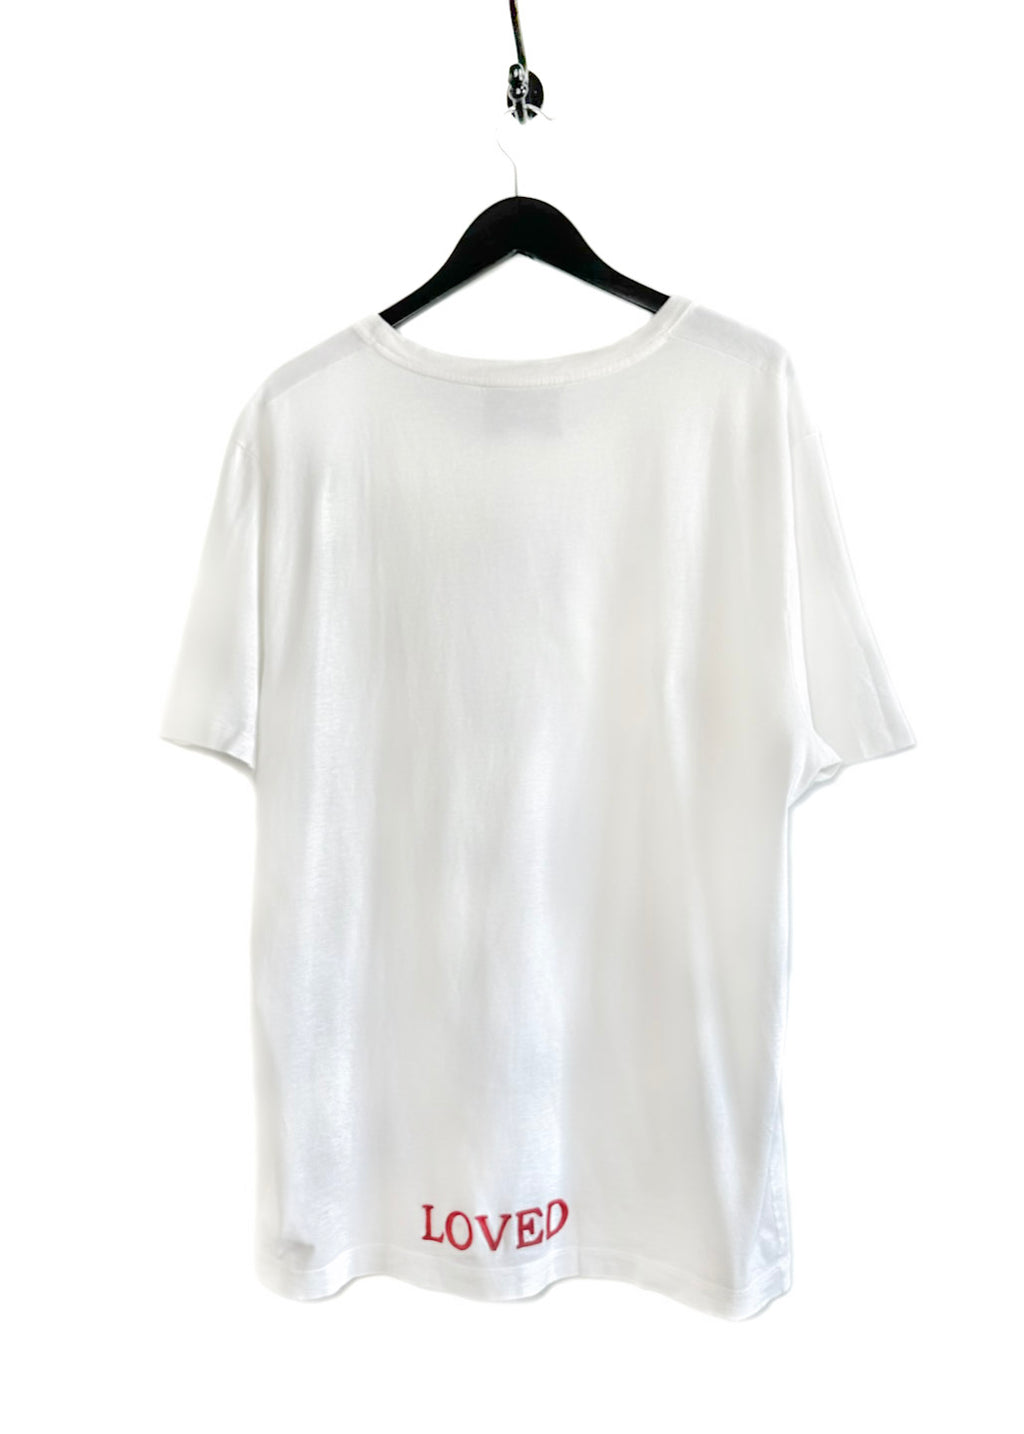 Gucci Heart Dagger Embroidered LOVED White T-shirt